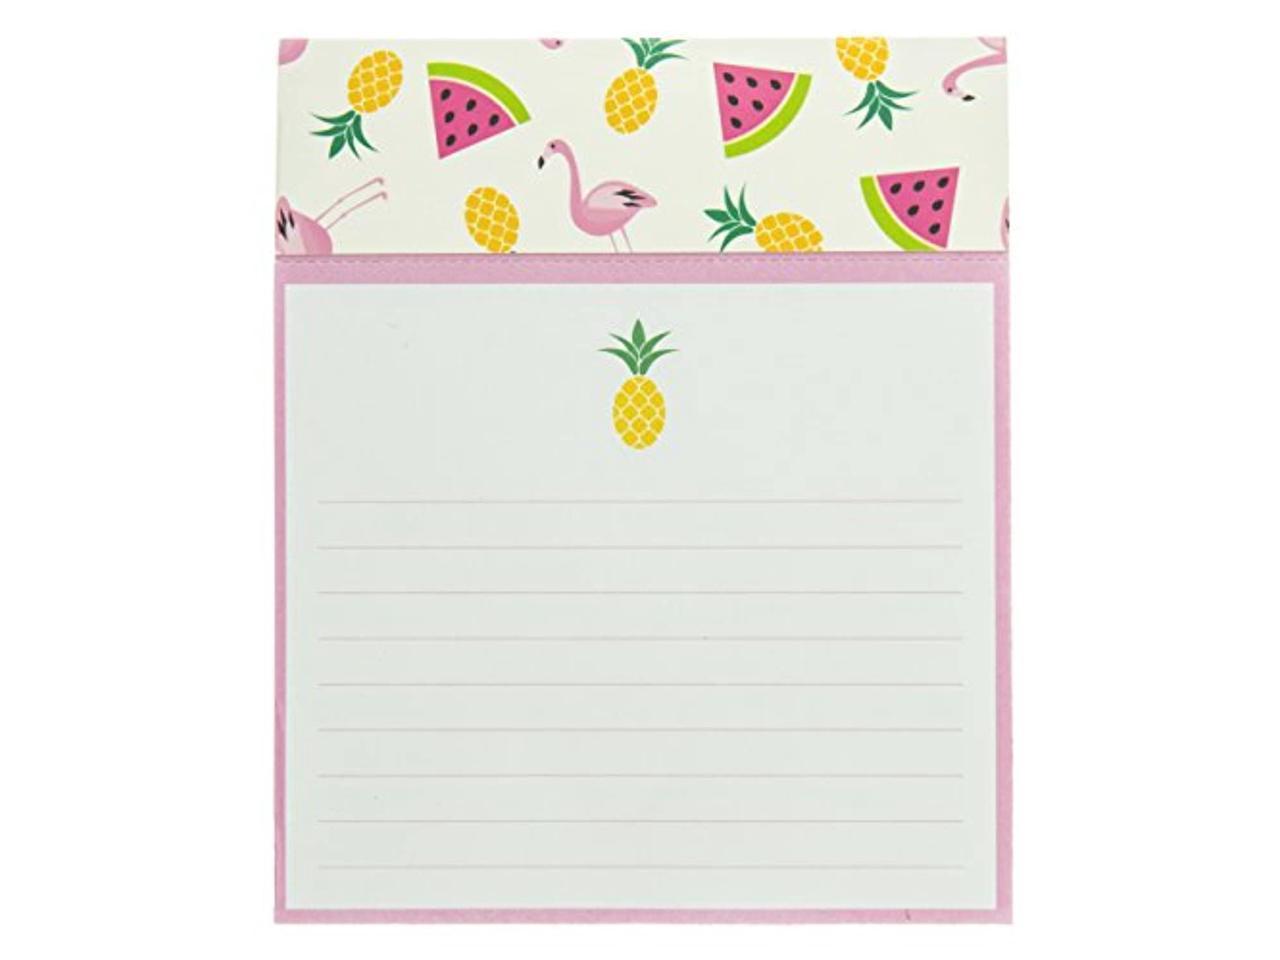 Embellished with Gold Foil Great for Kitchen Counters Nightstands Desks 4.5 x 5.5 x 1 Graphique Blush Pink Jotter Notepad and More Pad of Paper w/ 250 Tearable Ruled Pages Elegant and Fun 